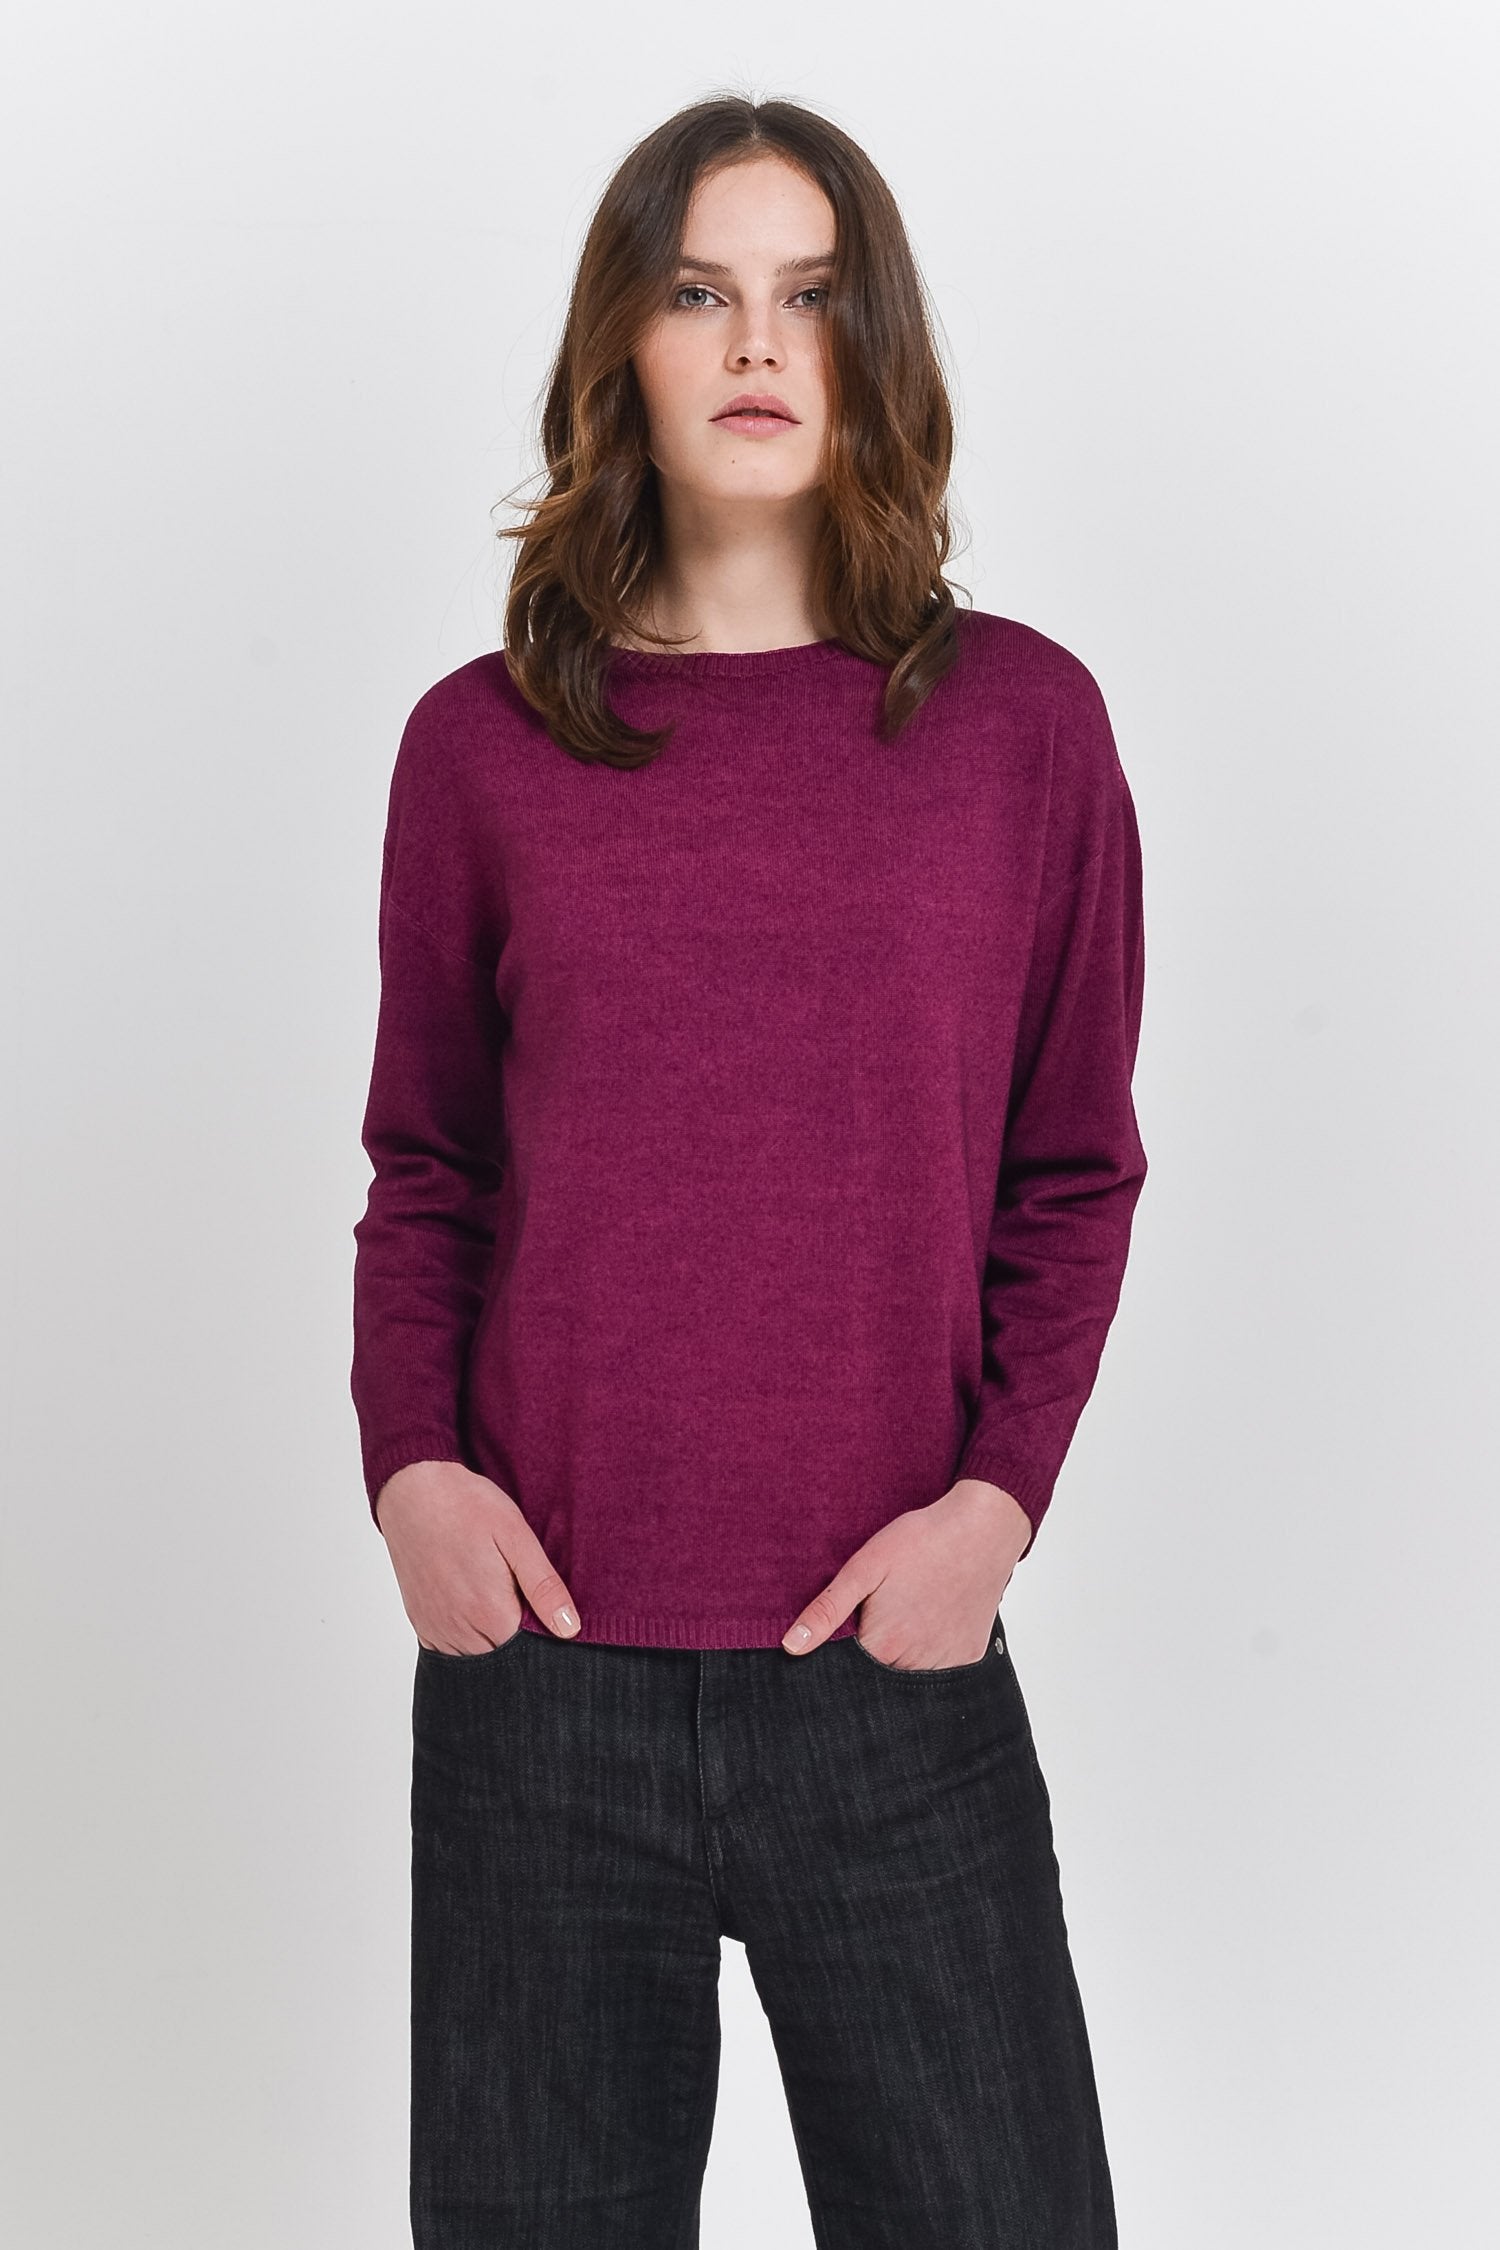 Reay Jam - Comfy Sweater - Sweaters